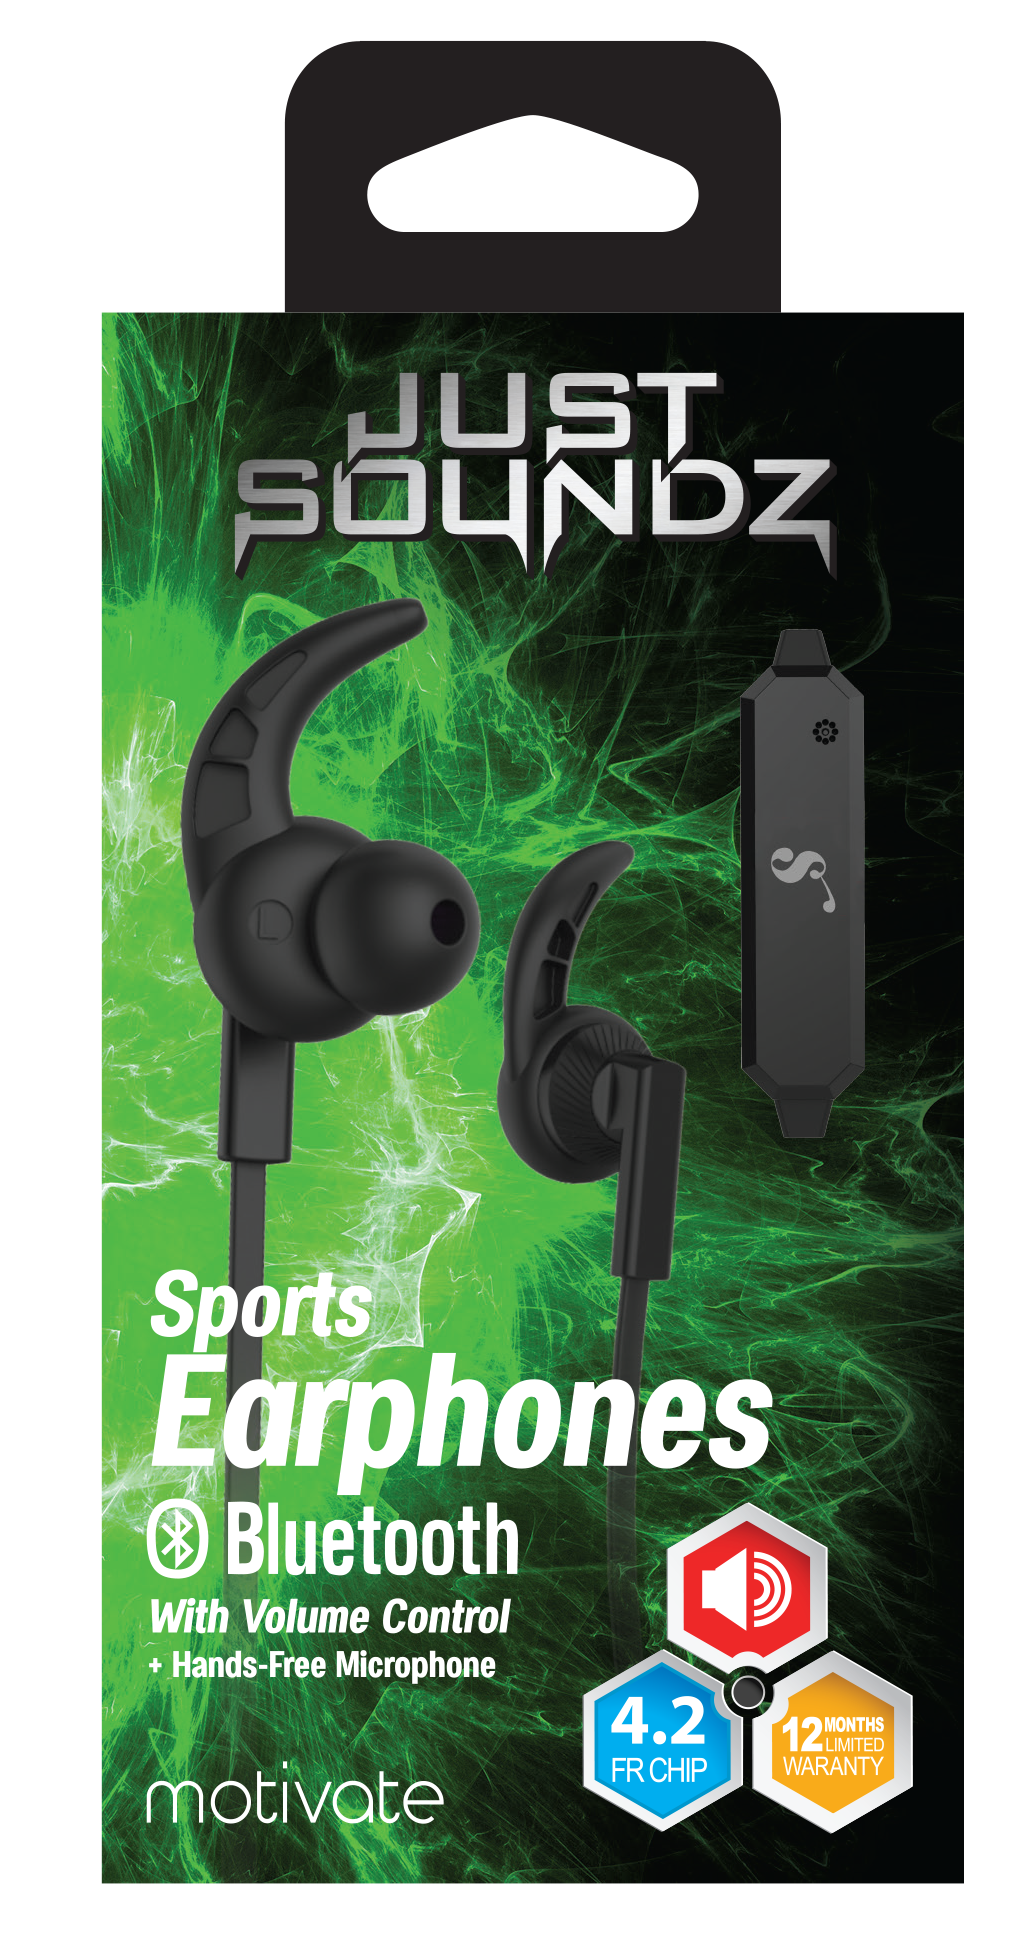 JustSounds Motivate Sports Earphone.png